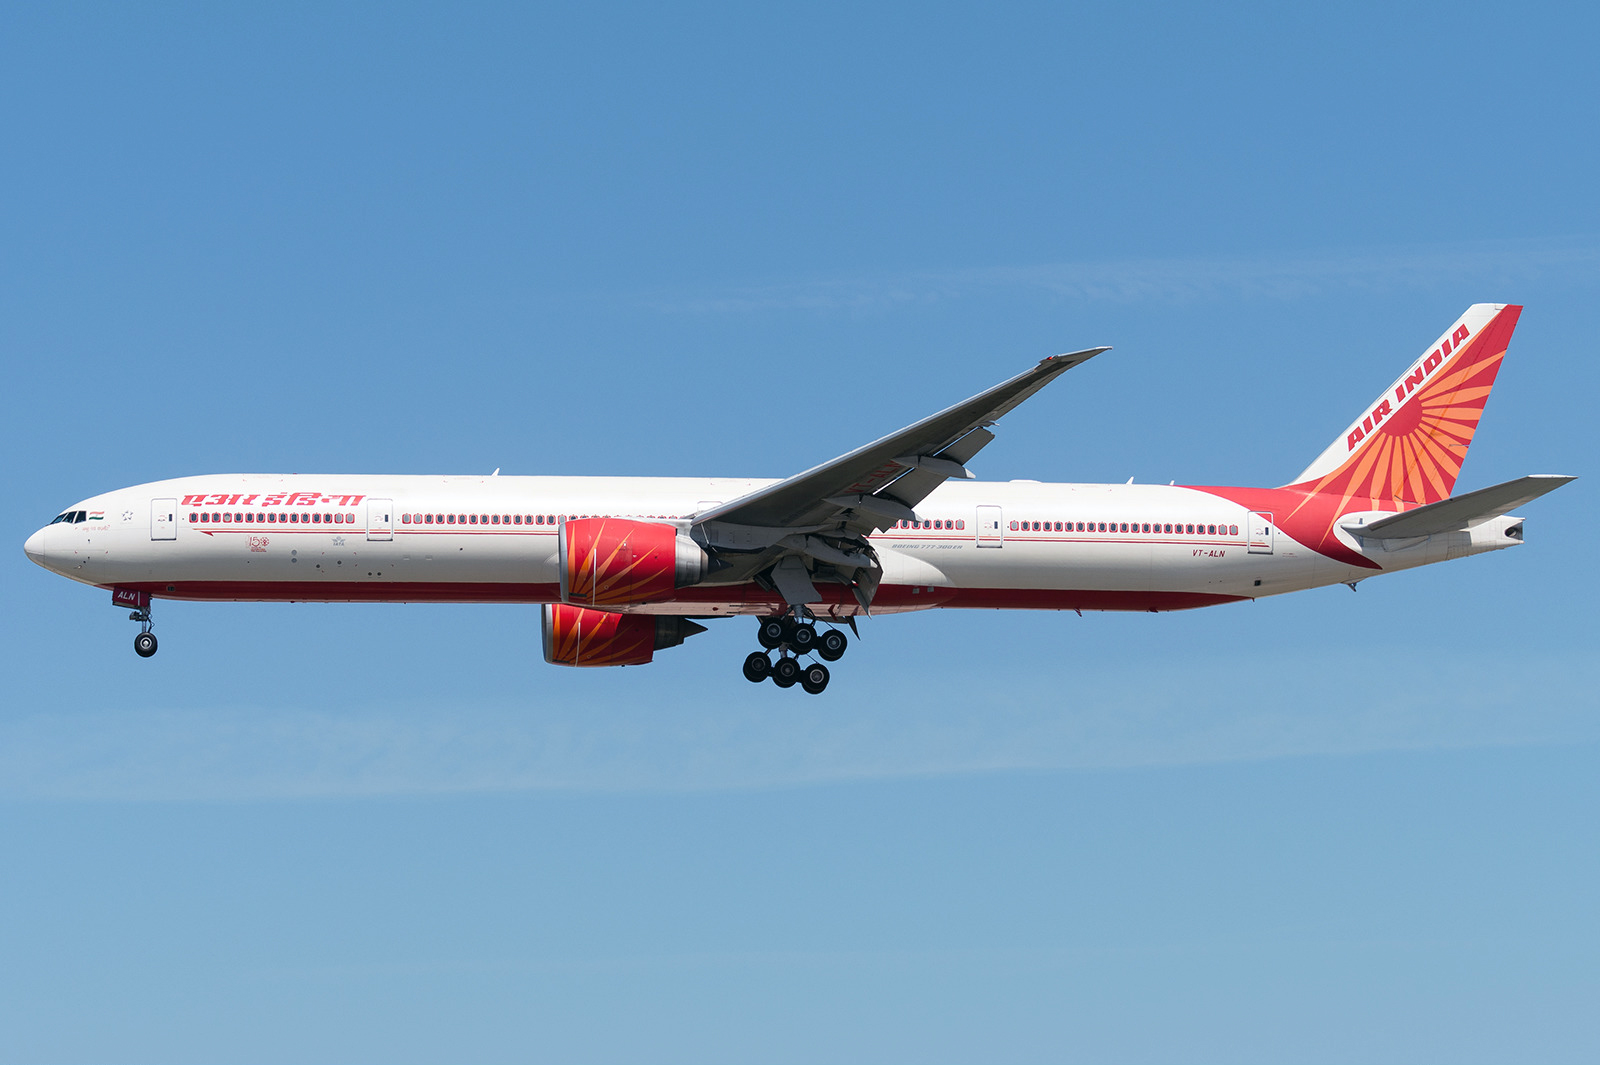 Boeing 777-300 Air India. Photos and description of the plane